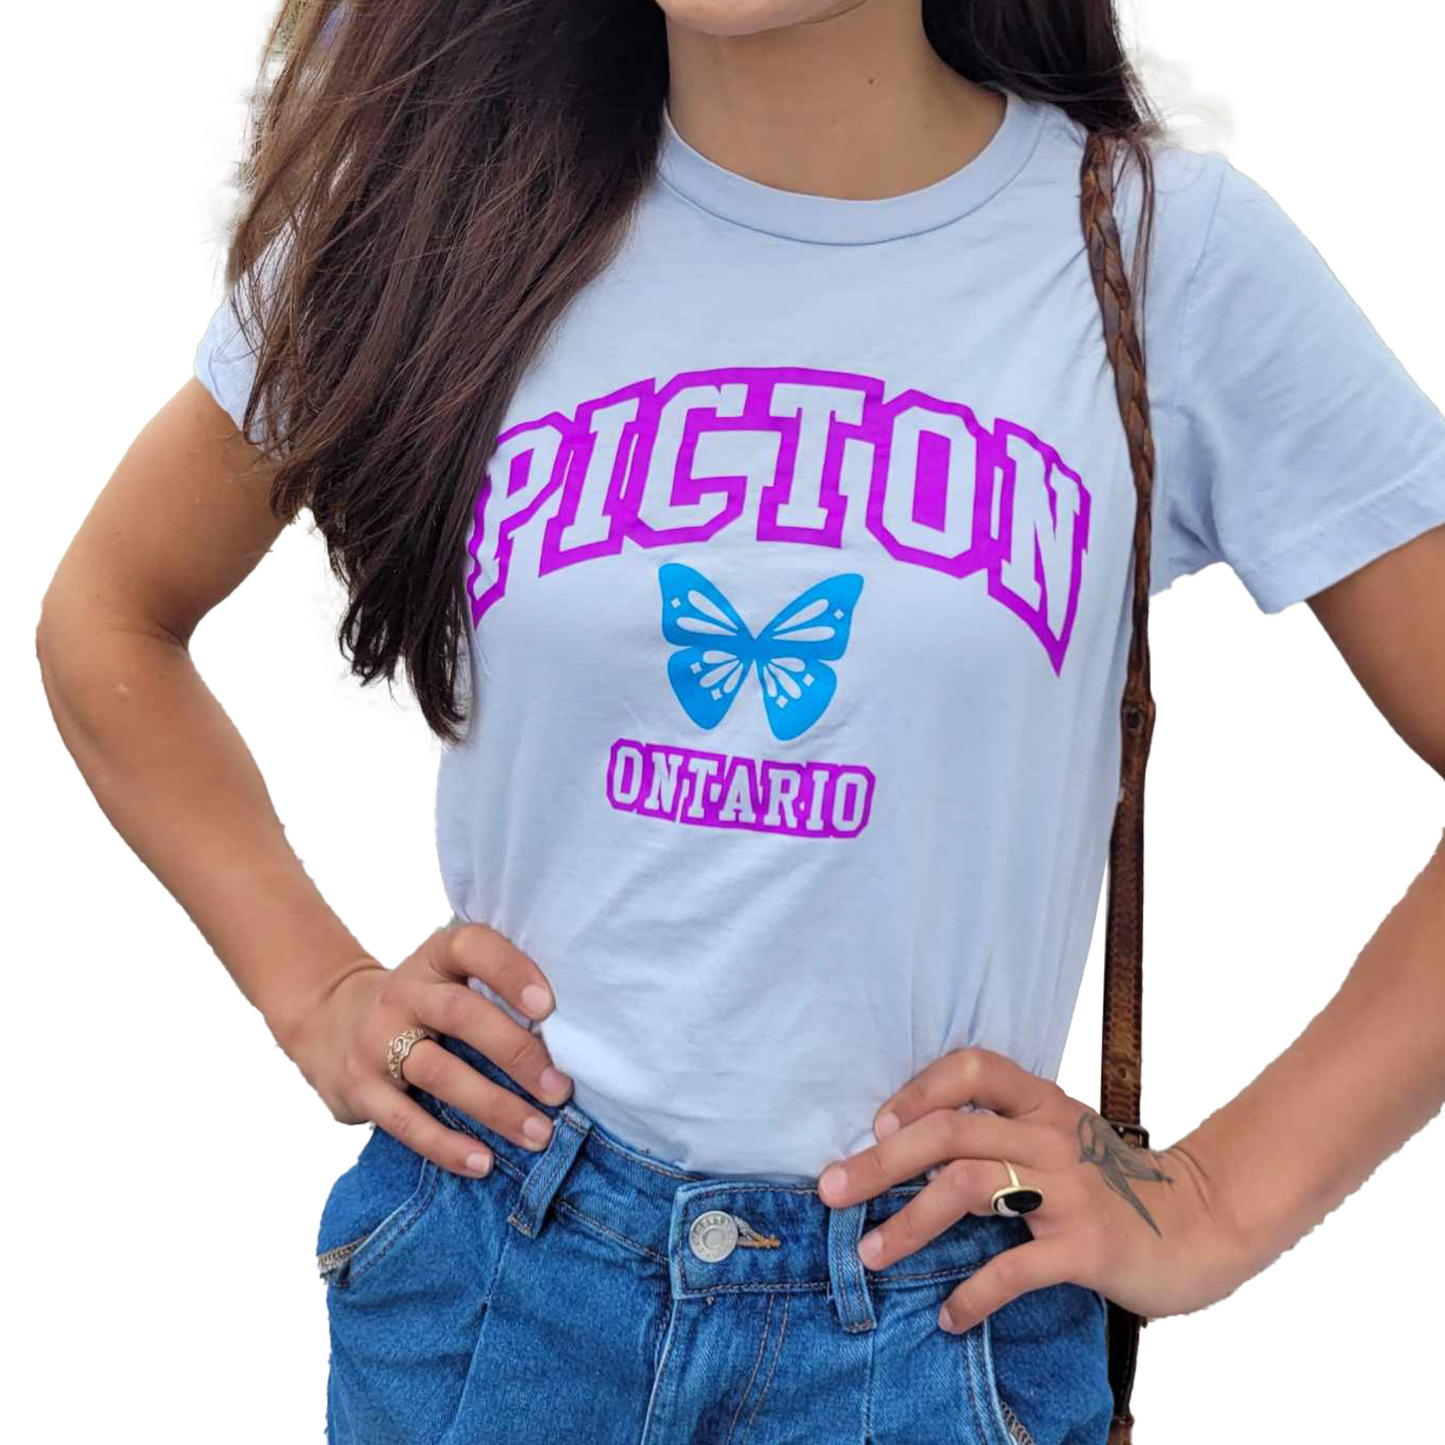 Ladies Picton "Butterfly" BabyBlue CrewCut T shirt